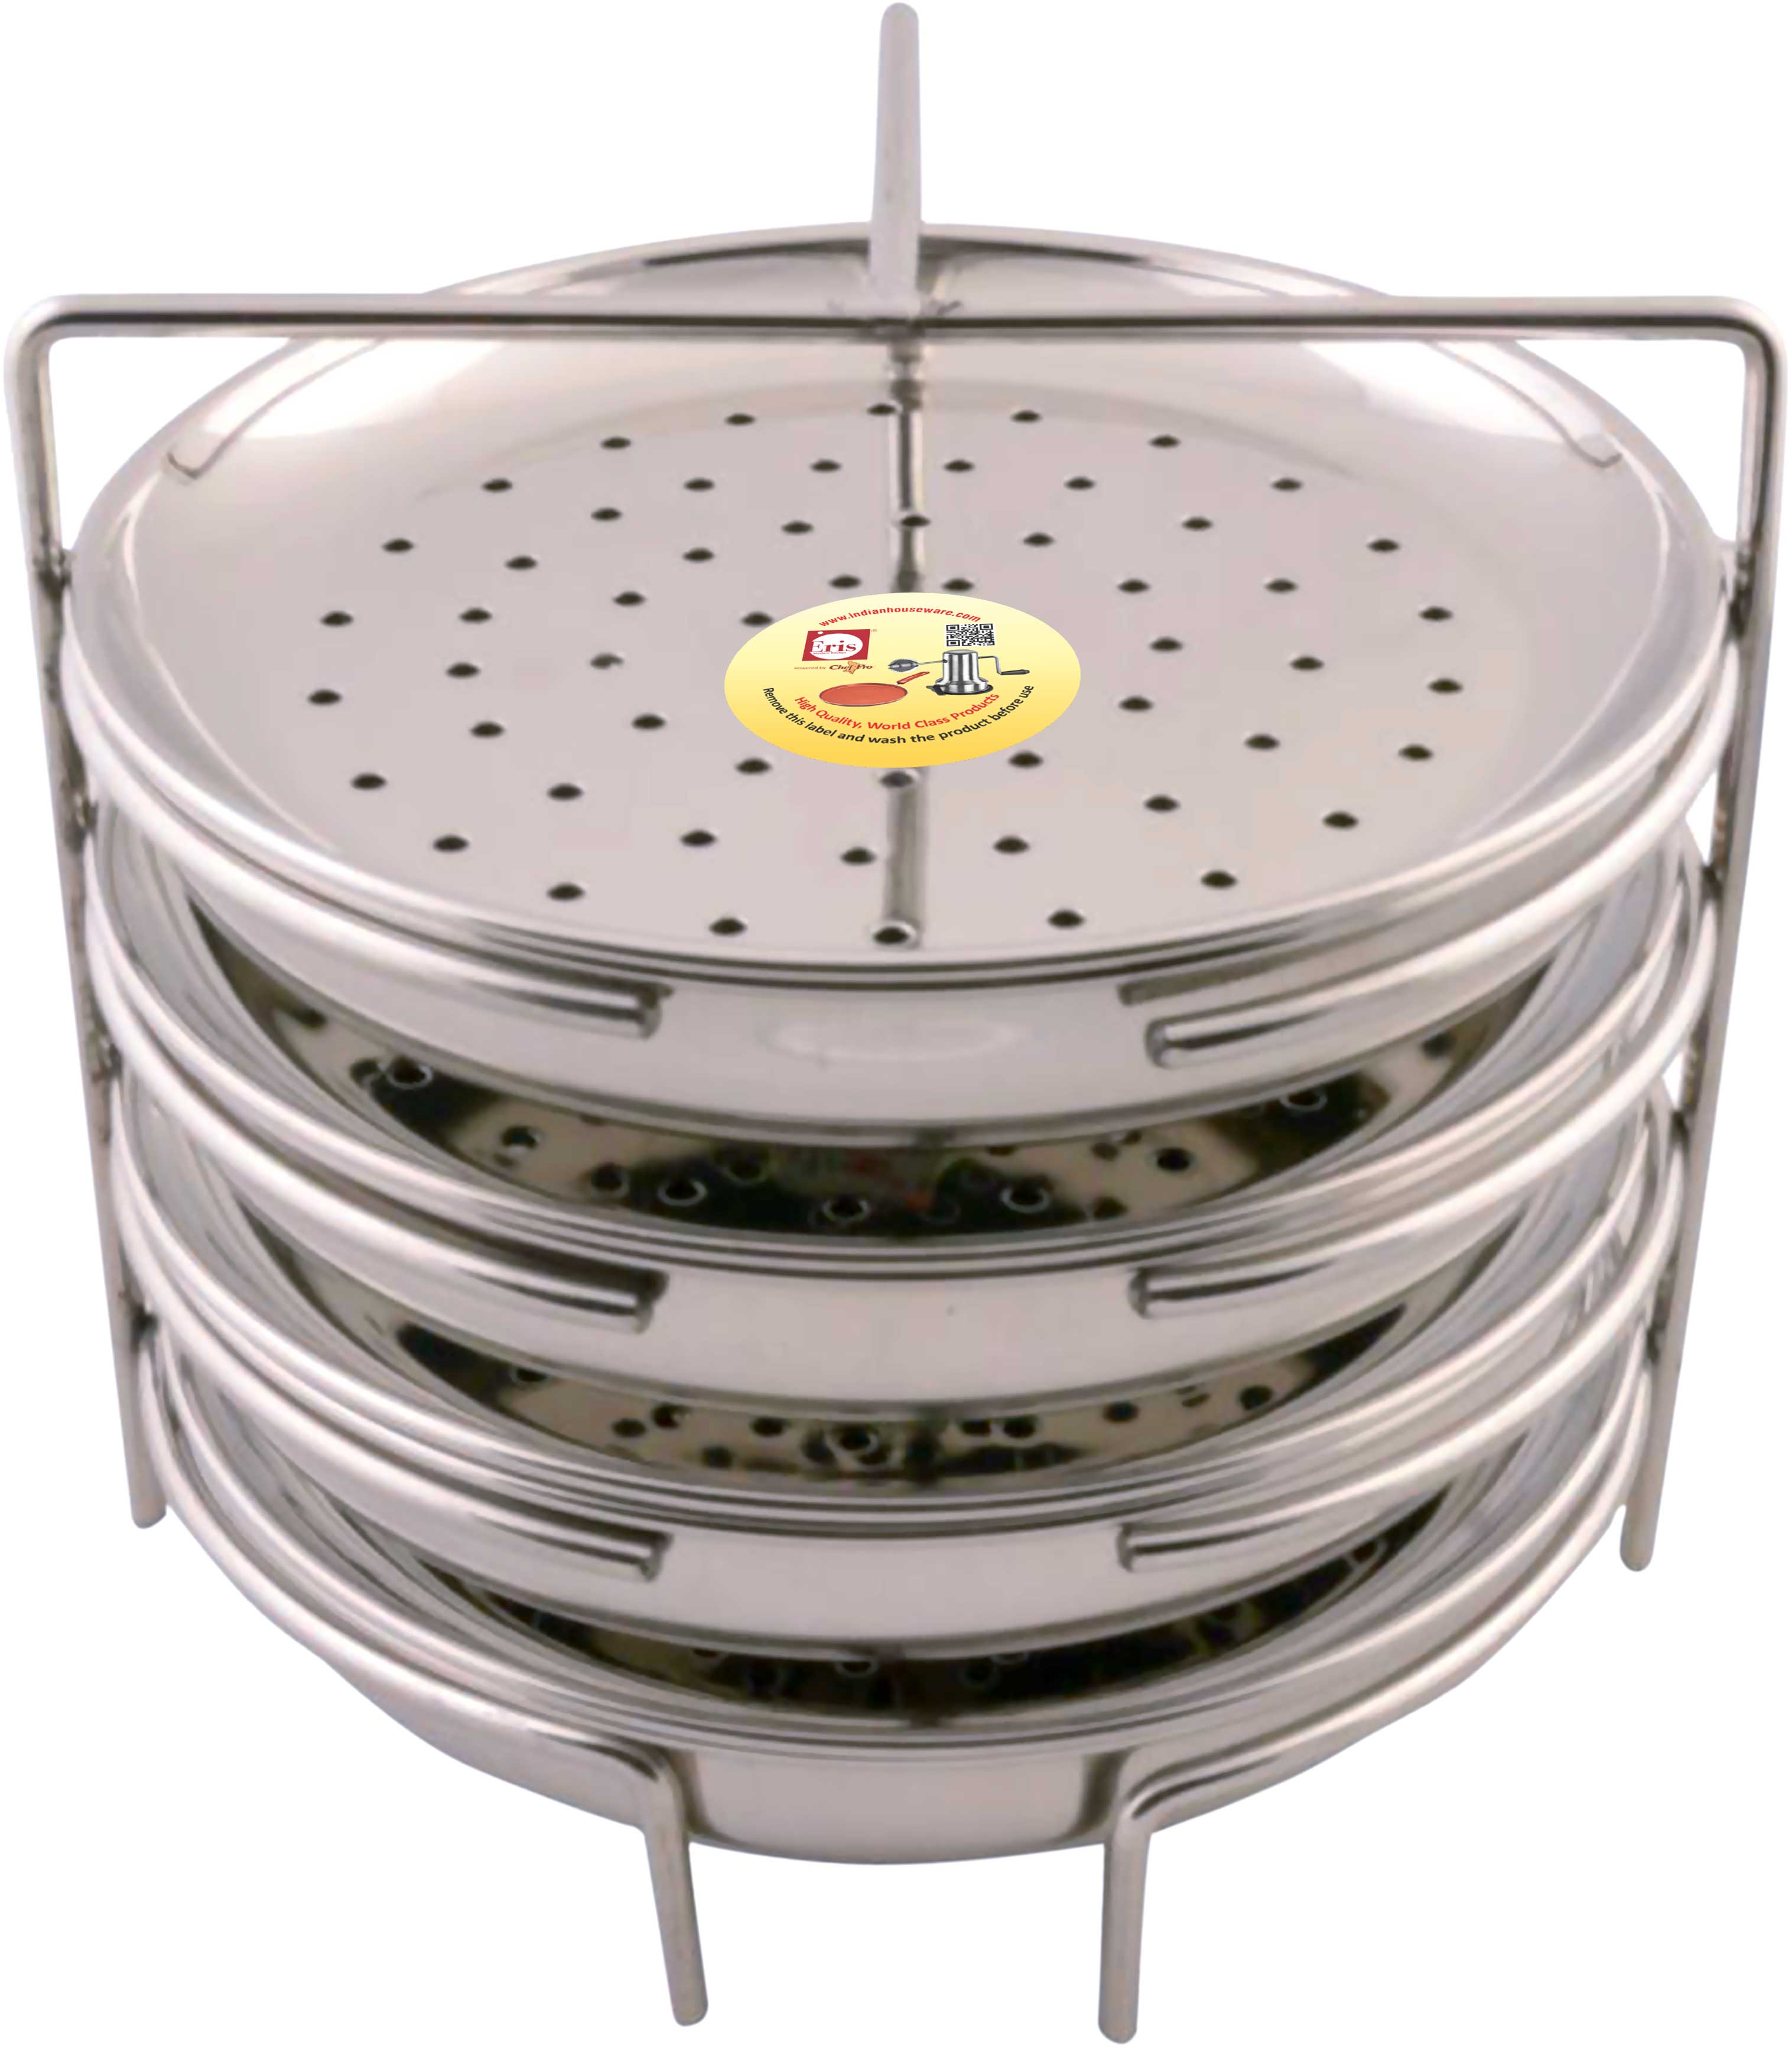 Stainless Steel Multi Steaming Stand with 9 plates